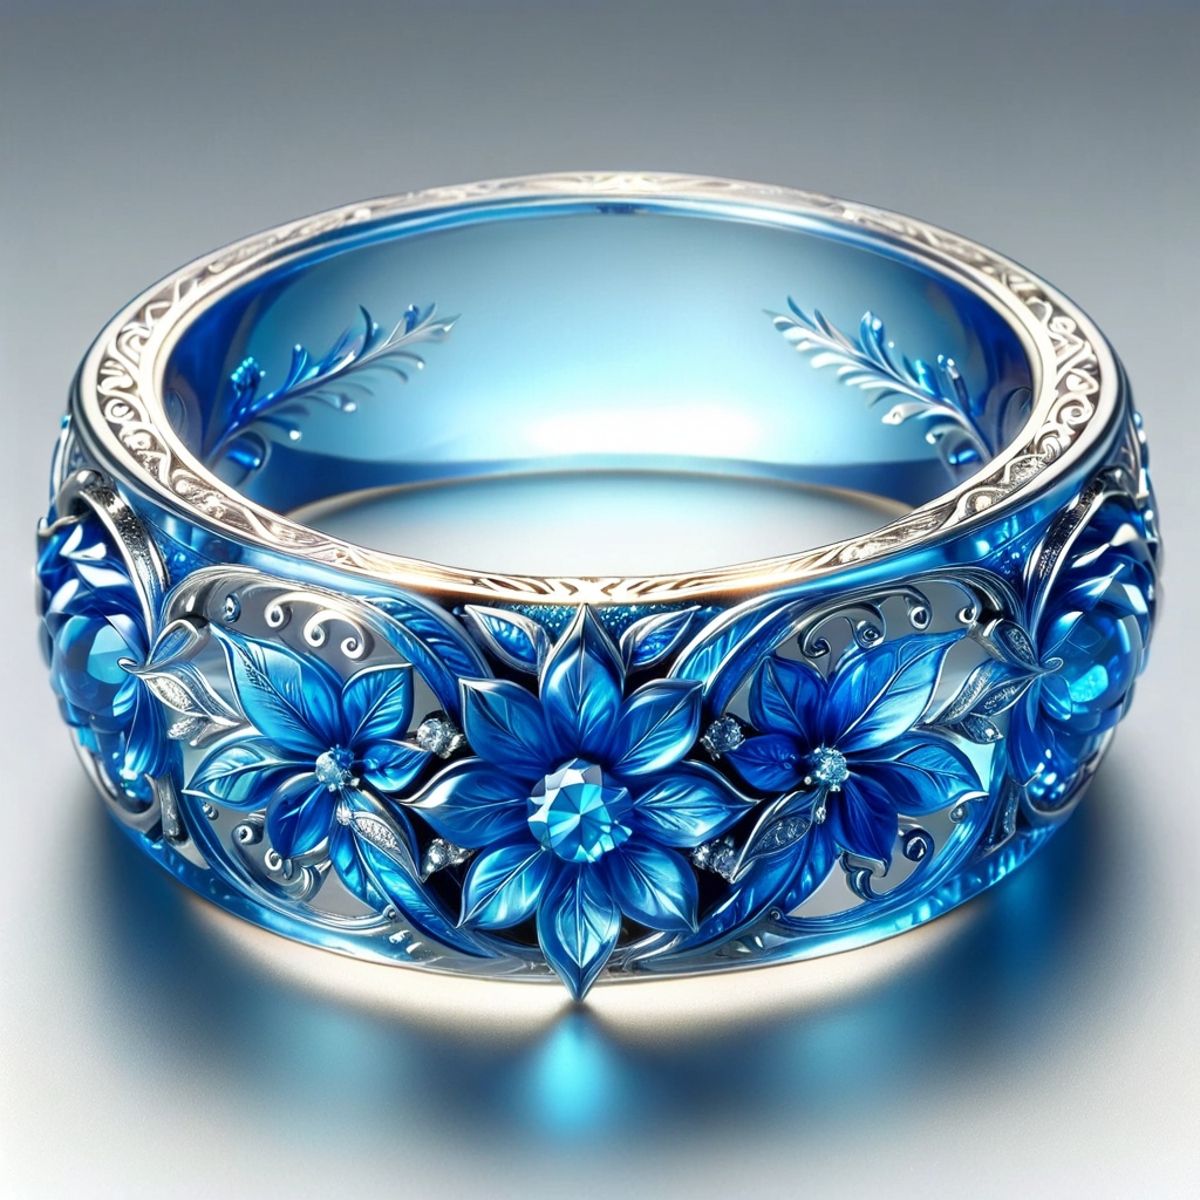 Blue and White Ring with Flowers and Leaves